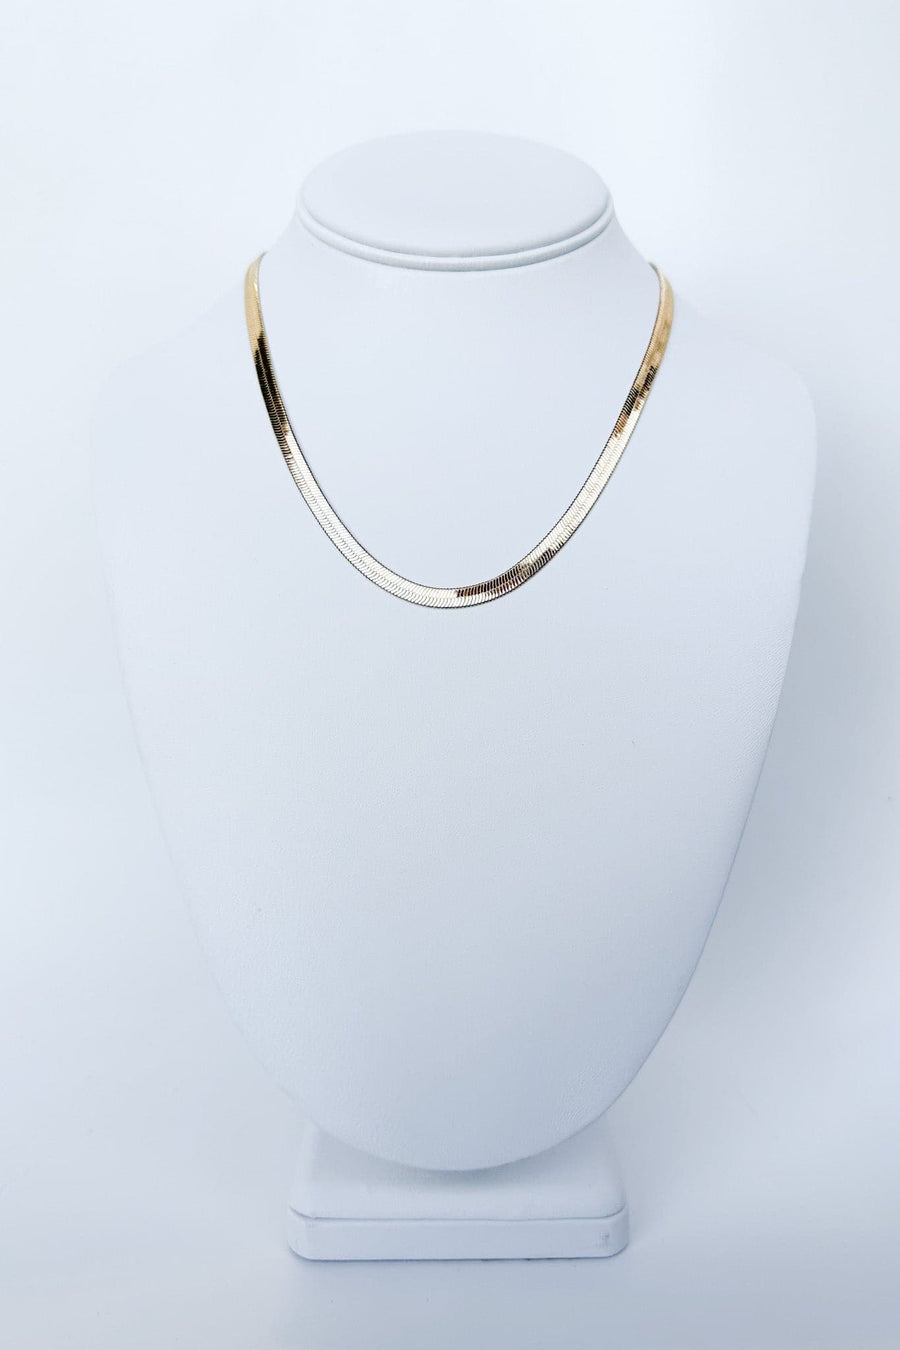 Gold Midnight Chic Snake Chain Necklace - kitchencabinetmagic